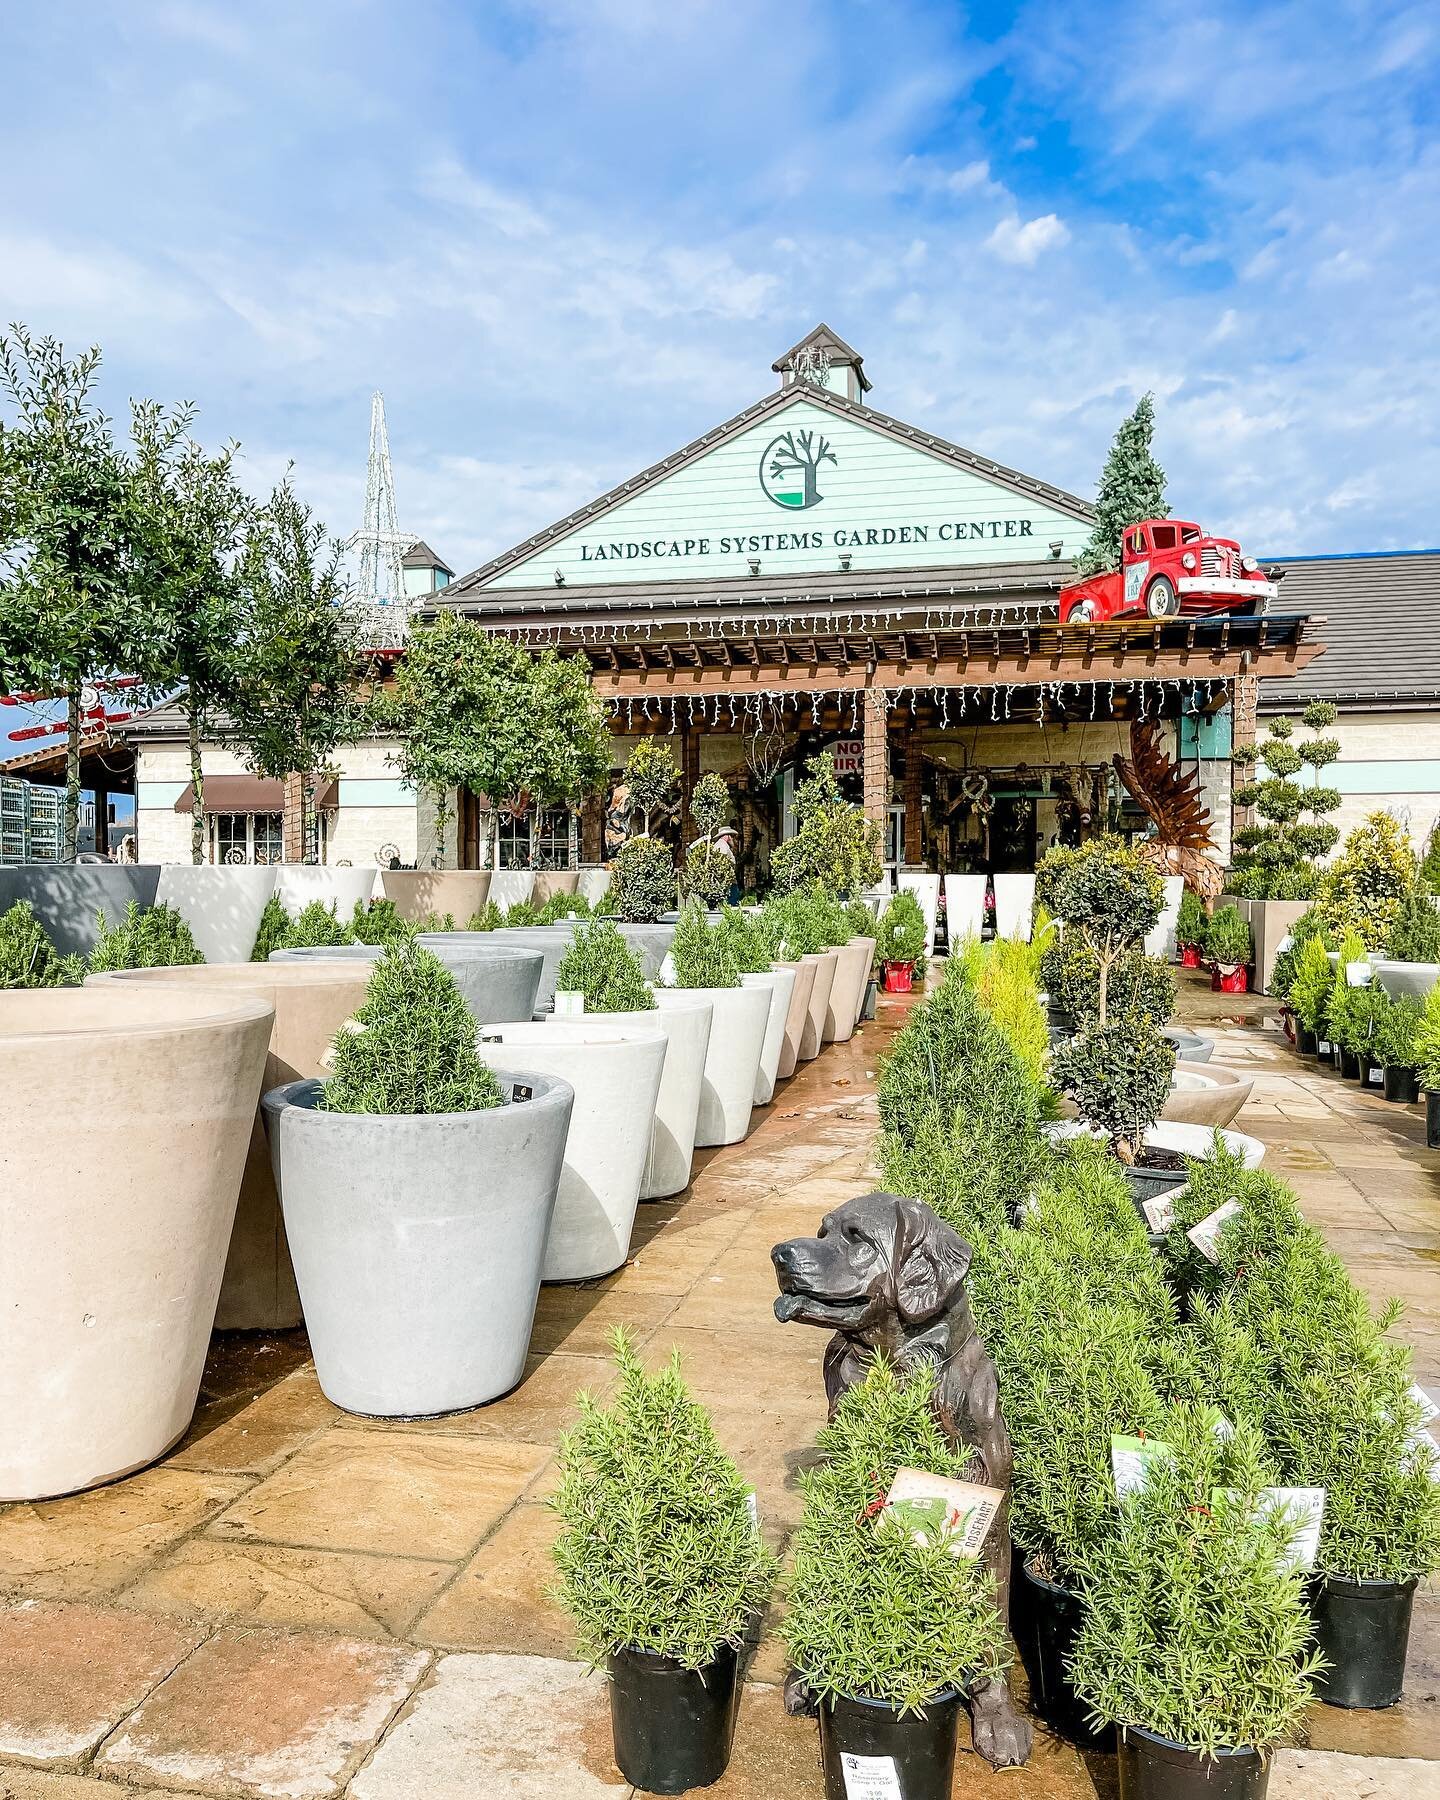 Our annual End of the Year SALE is going on NOW! Shop 25% off on trees, shrubs, plants and home decor. Take advantage of the warm weather for the next few days and get your winter color planted. 🌿🌳